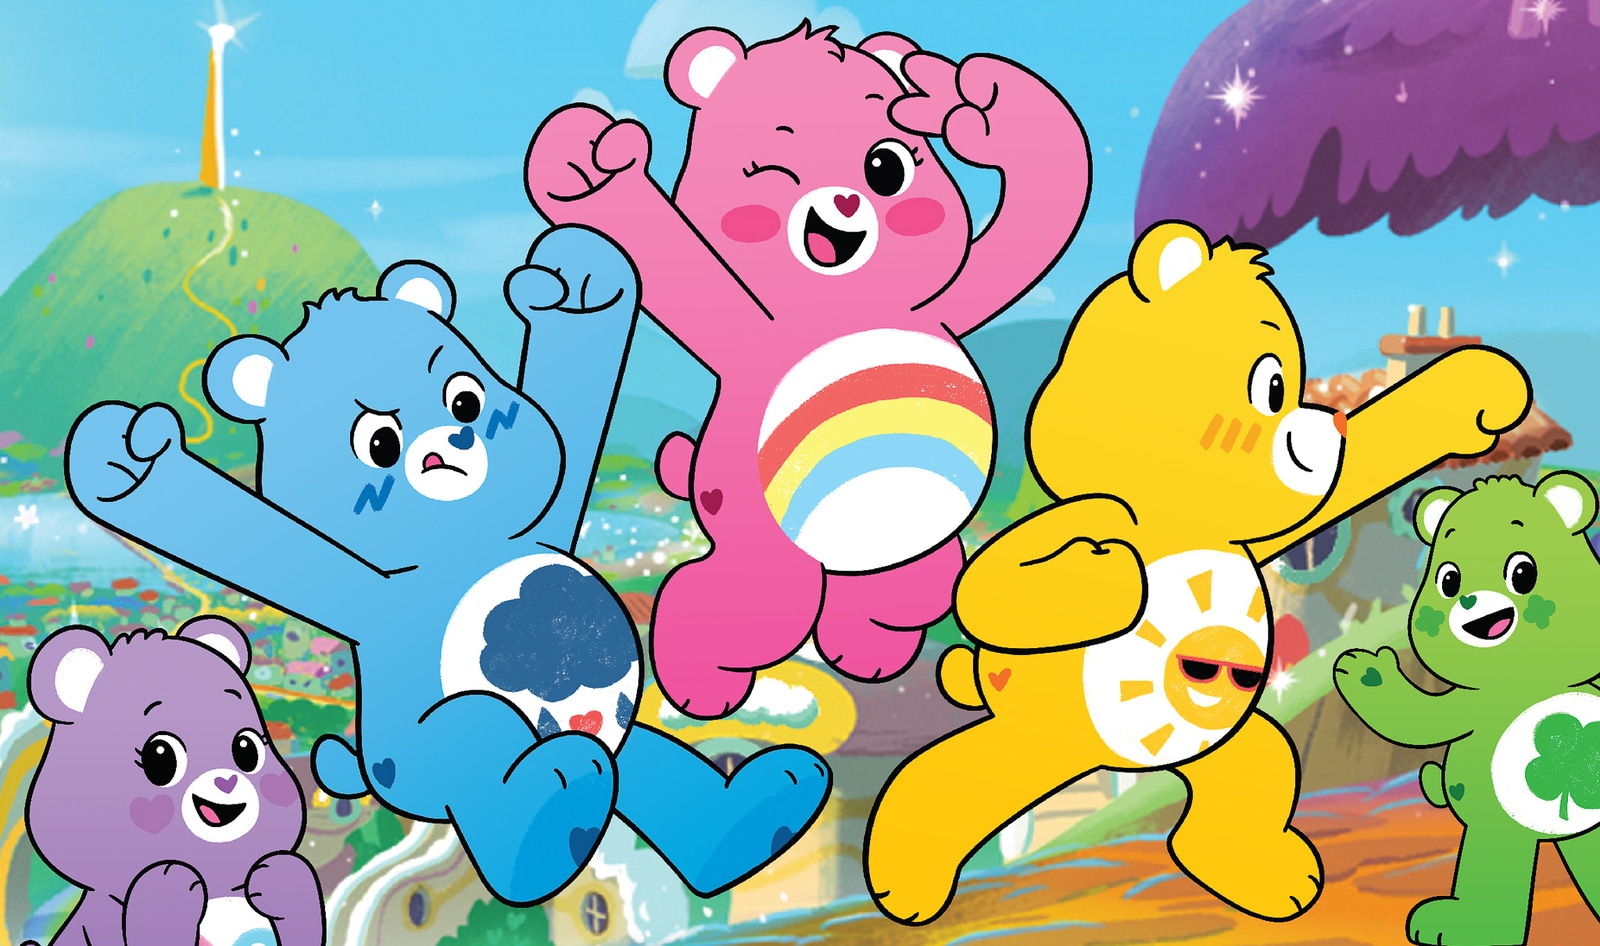 Care Bears Celebrate 40 Years With Vegan Cookies, Candies, and Ice Cream